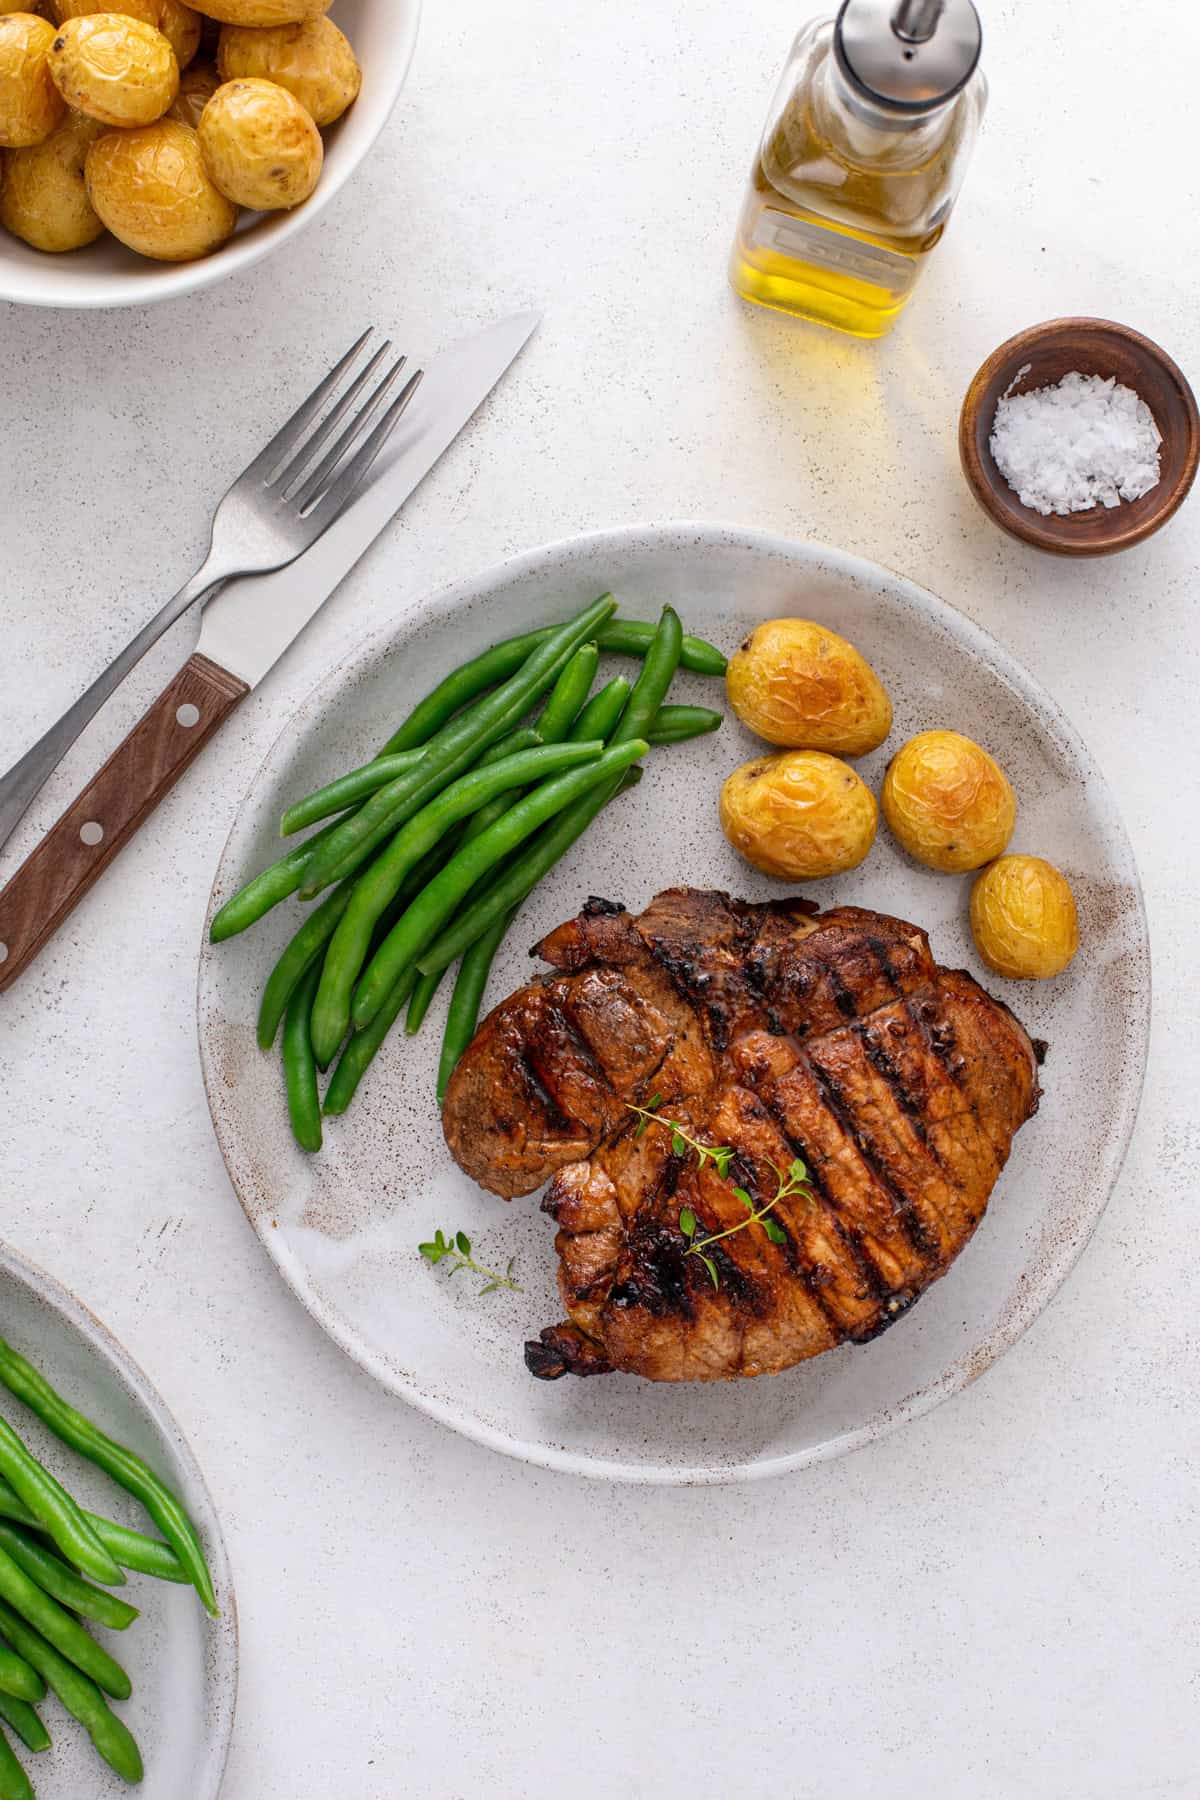 Overhead view of a grilled pork chop plated next to potatoes and green beans.